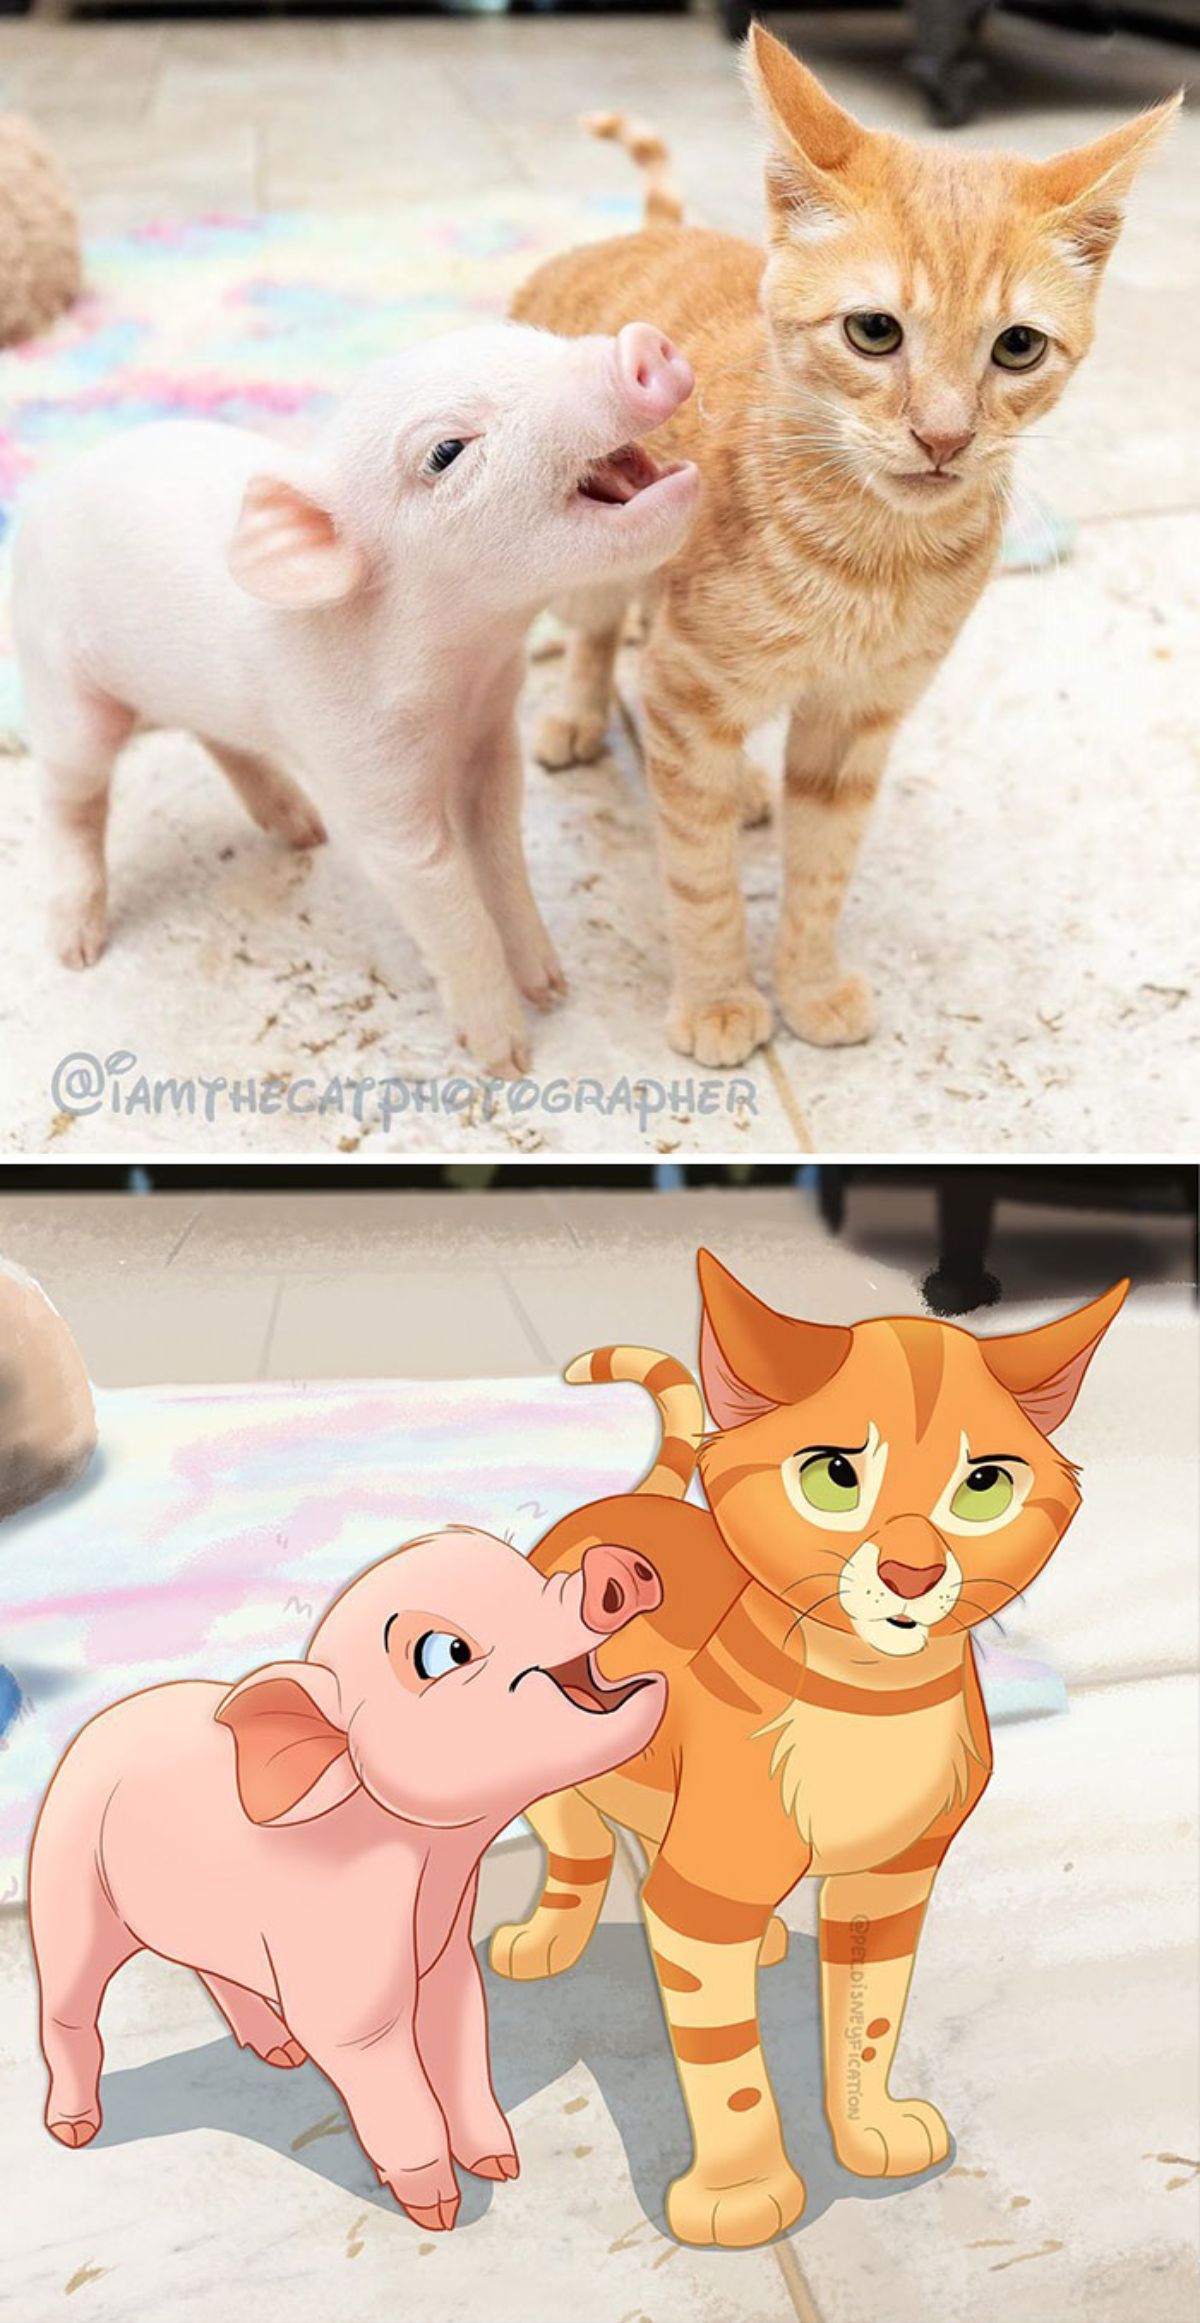 real photo and cartoon image of a piglet standing with an orange kitten